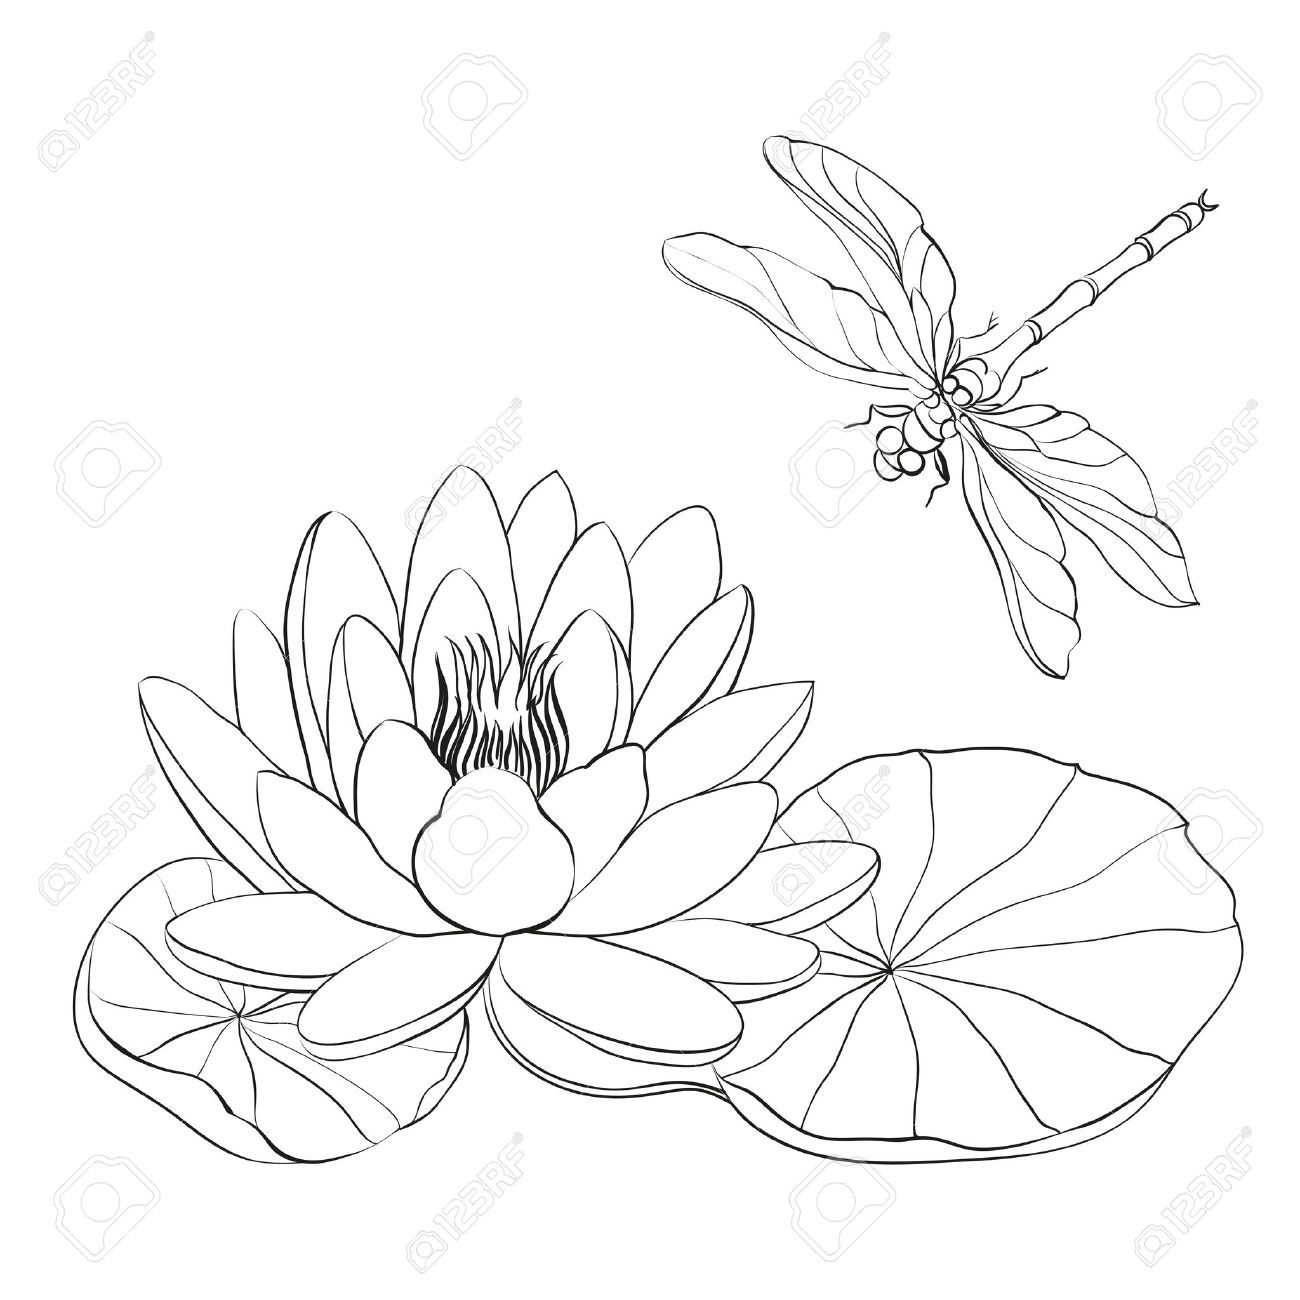 Lily Cliparts, Stock Vector And Royalty Free Lily